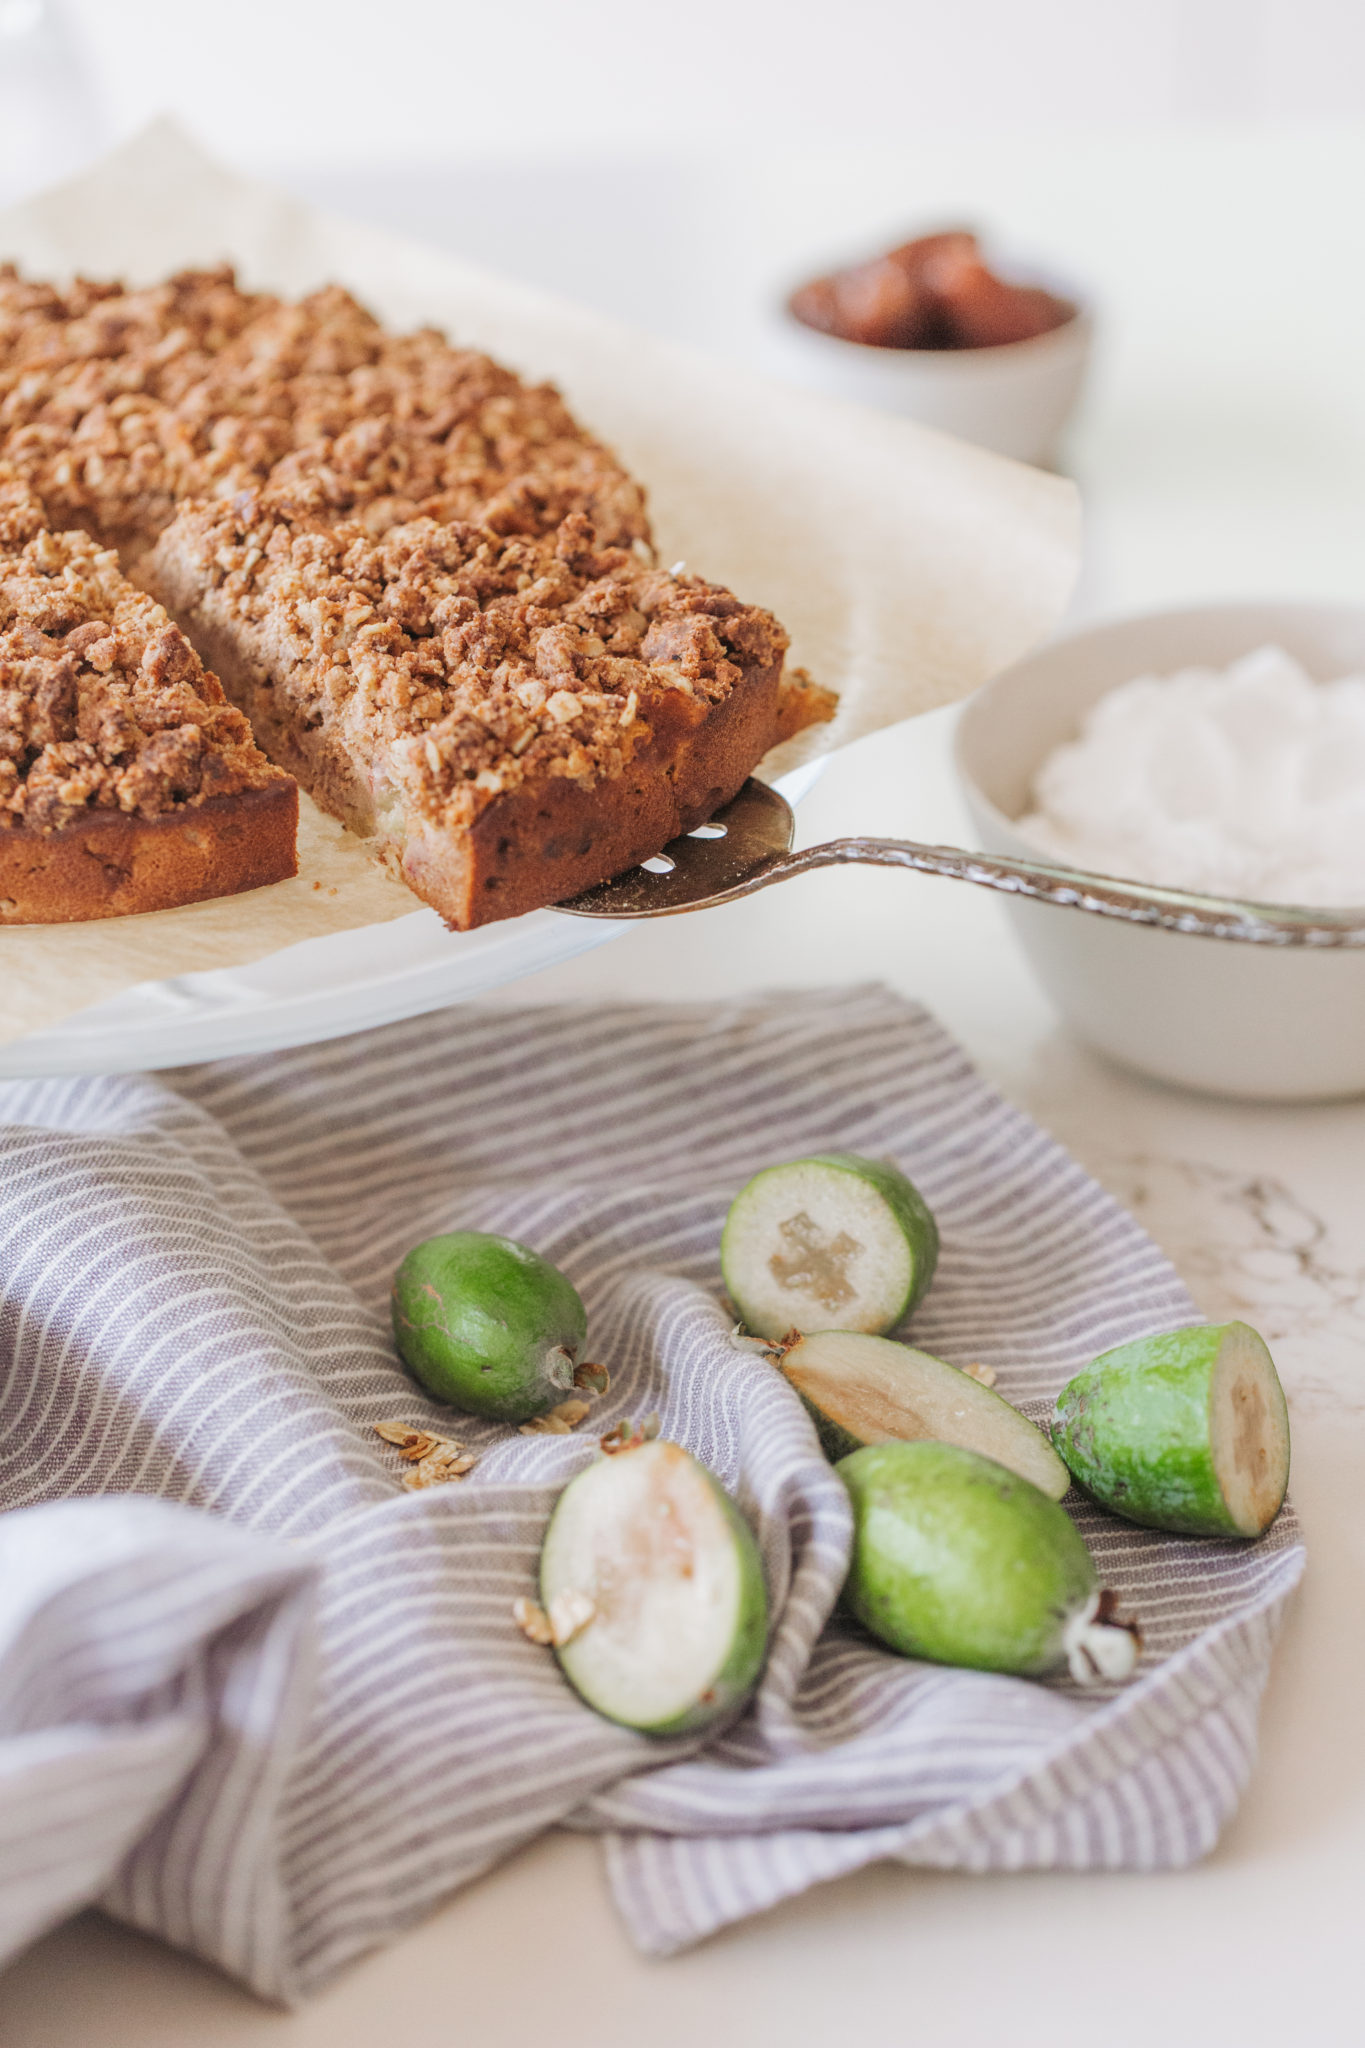 Feijoa Crumble Cake with dollop of coconut yogurt, sliced feijoa and stripped tea towel